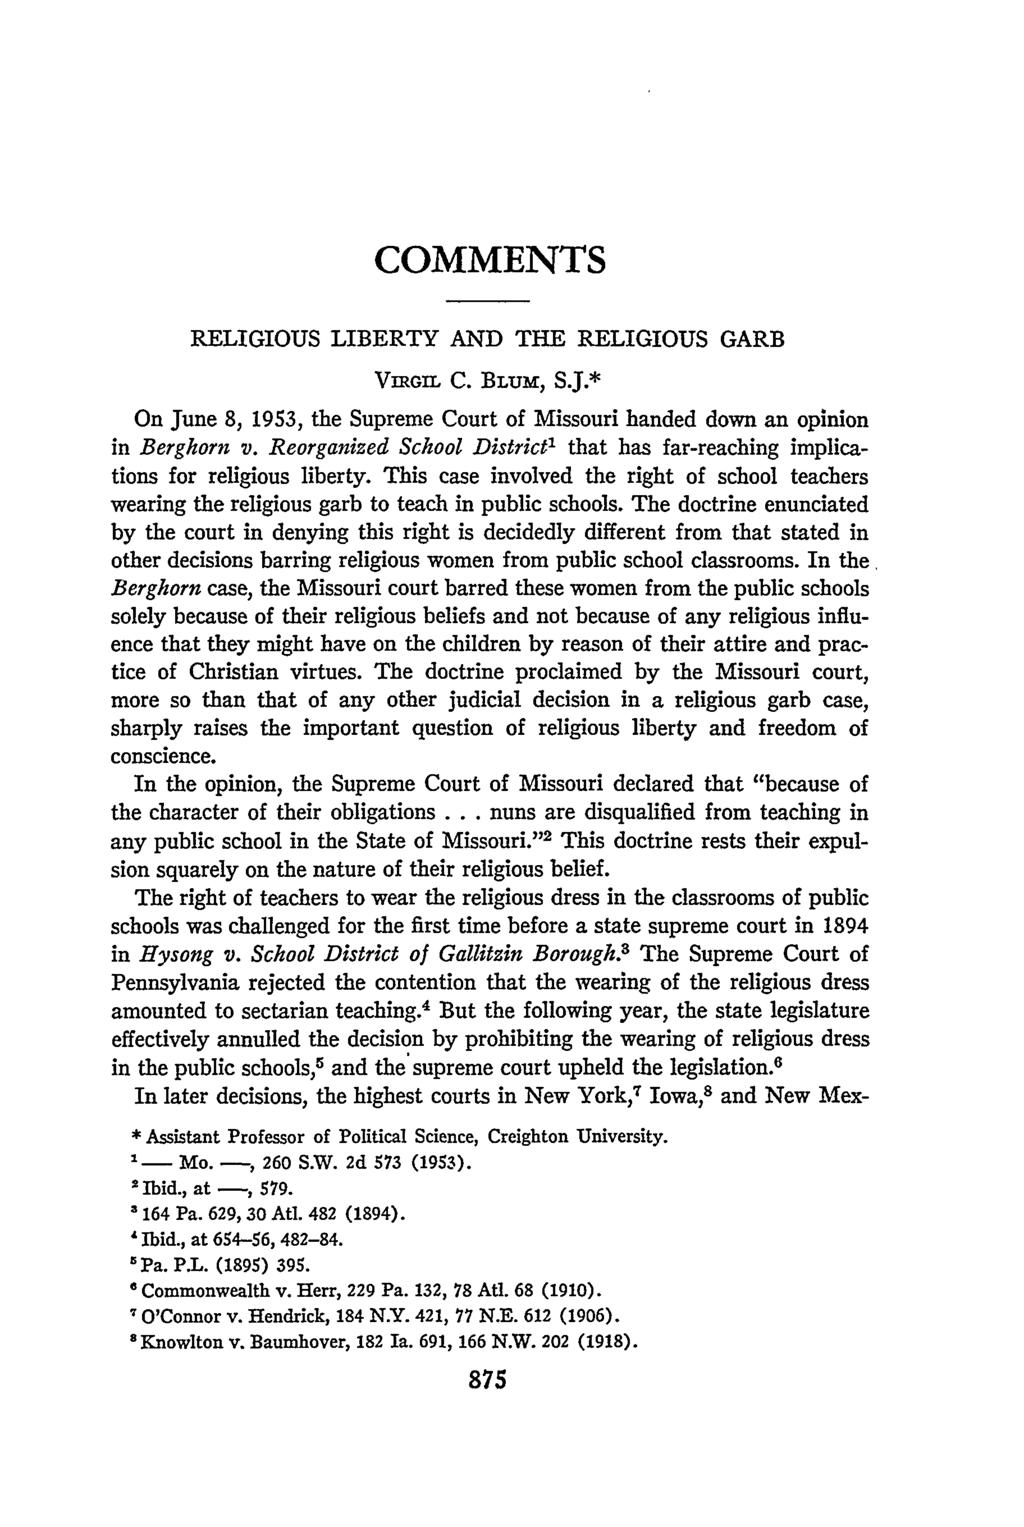 COMMENTS RELIGIOUS LIBERTY AND THE RELIGIOUS GARB ViRGI C. BLum, S.J.* On June 8, 1953, the Supreme Court of Missouri handed down an opinion in Berghorn v.